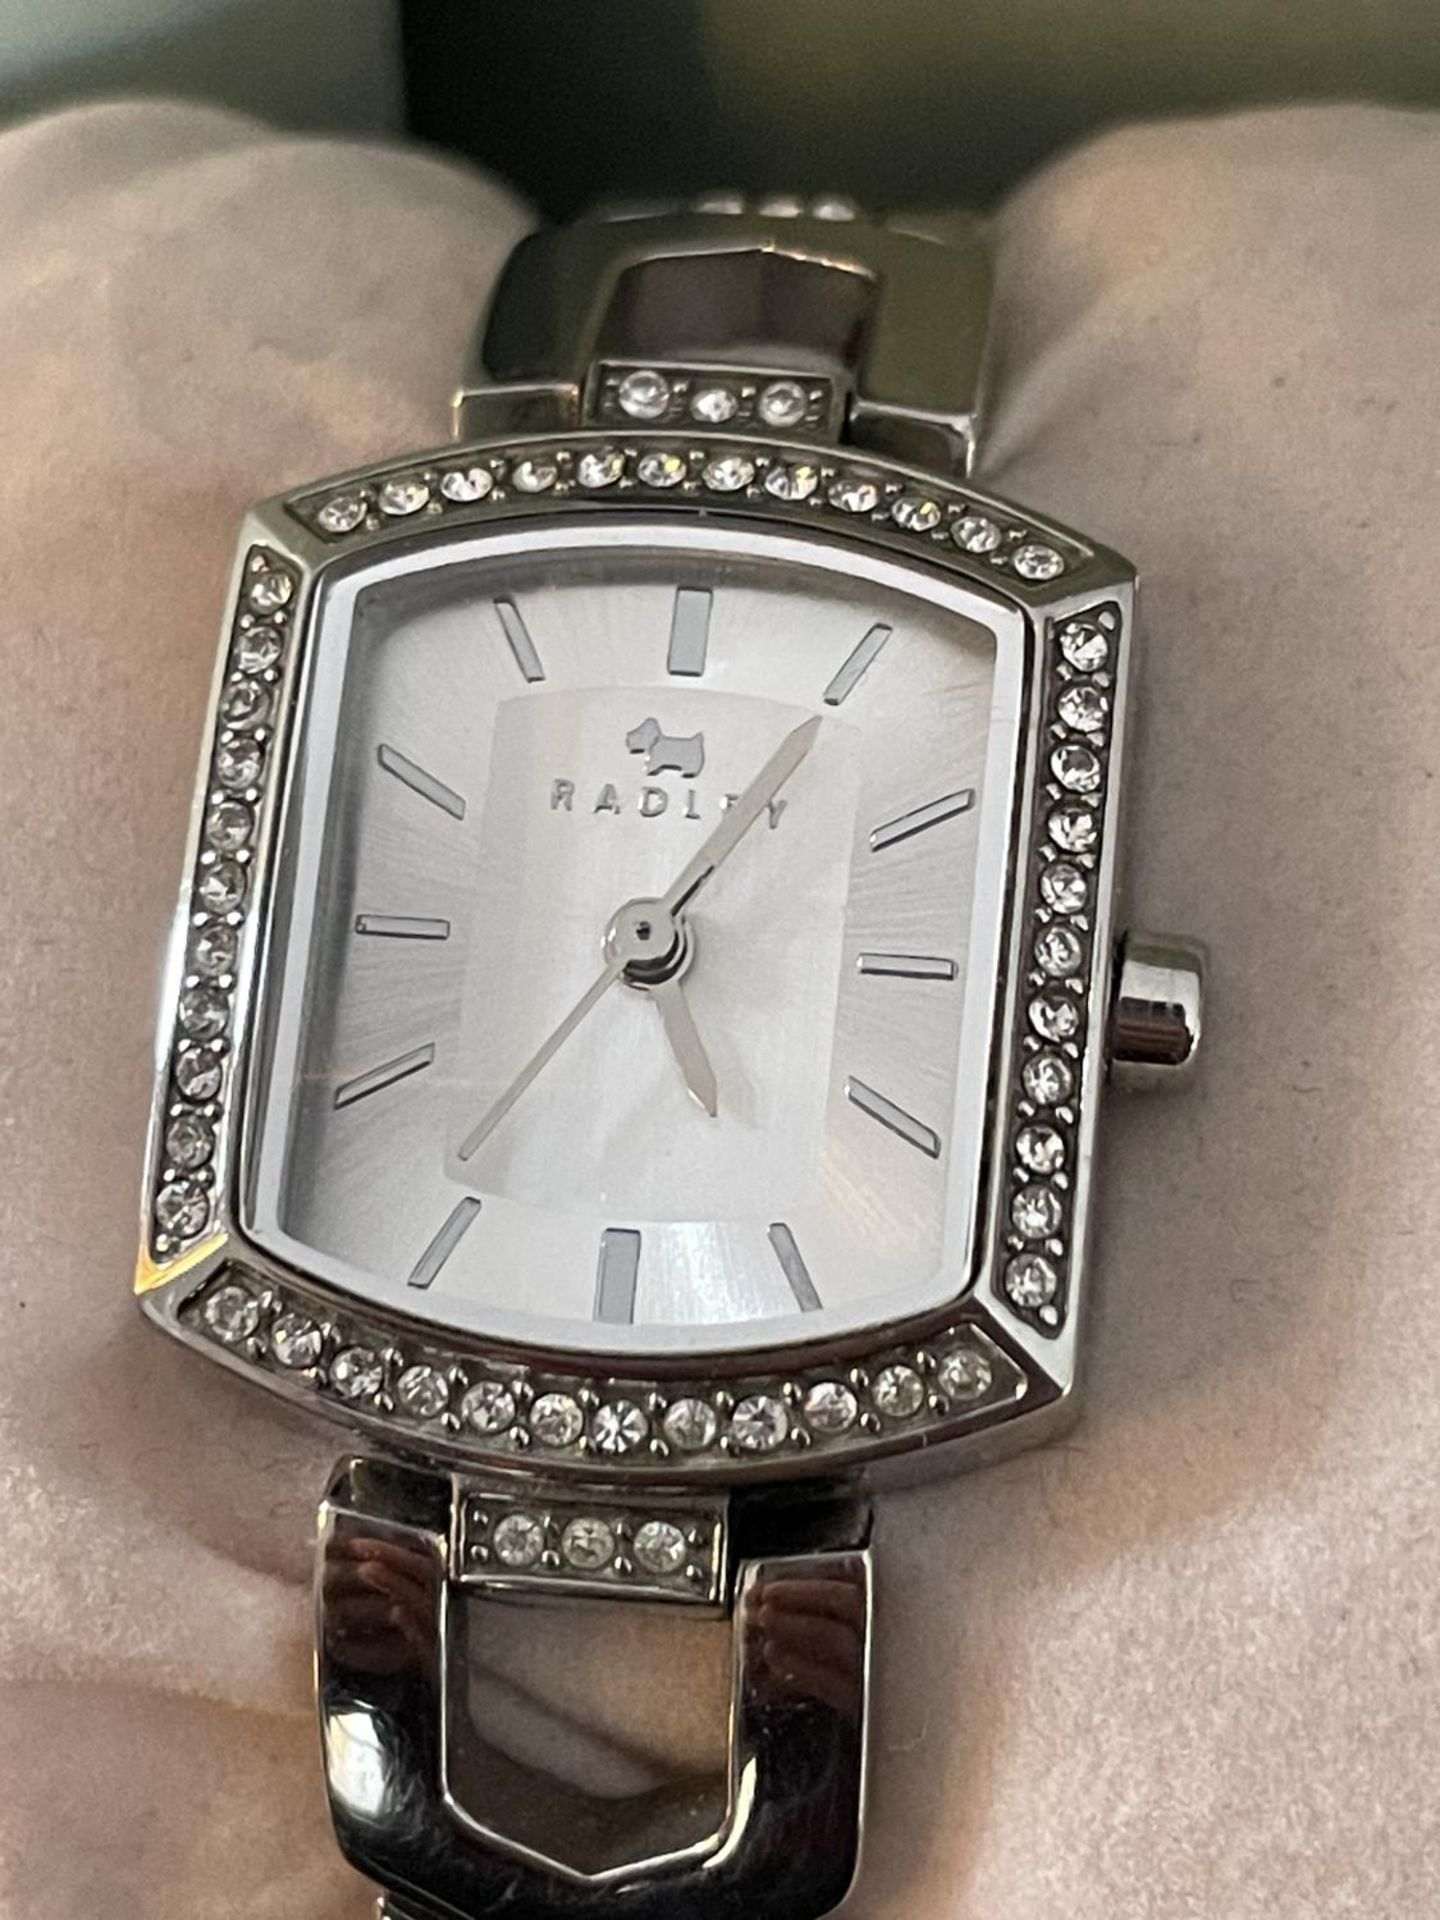 A RADLEY WATCH IN A PRESENTATION BOX SEEN WORKING BUT NO WARRANTY - Image 2 of 4